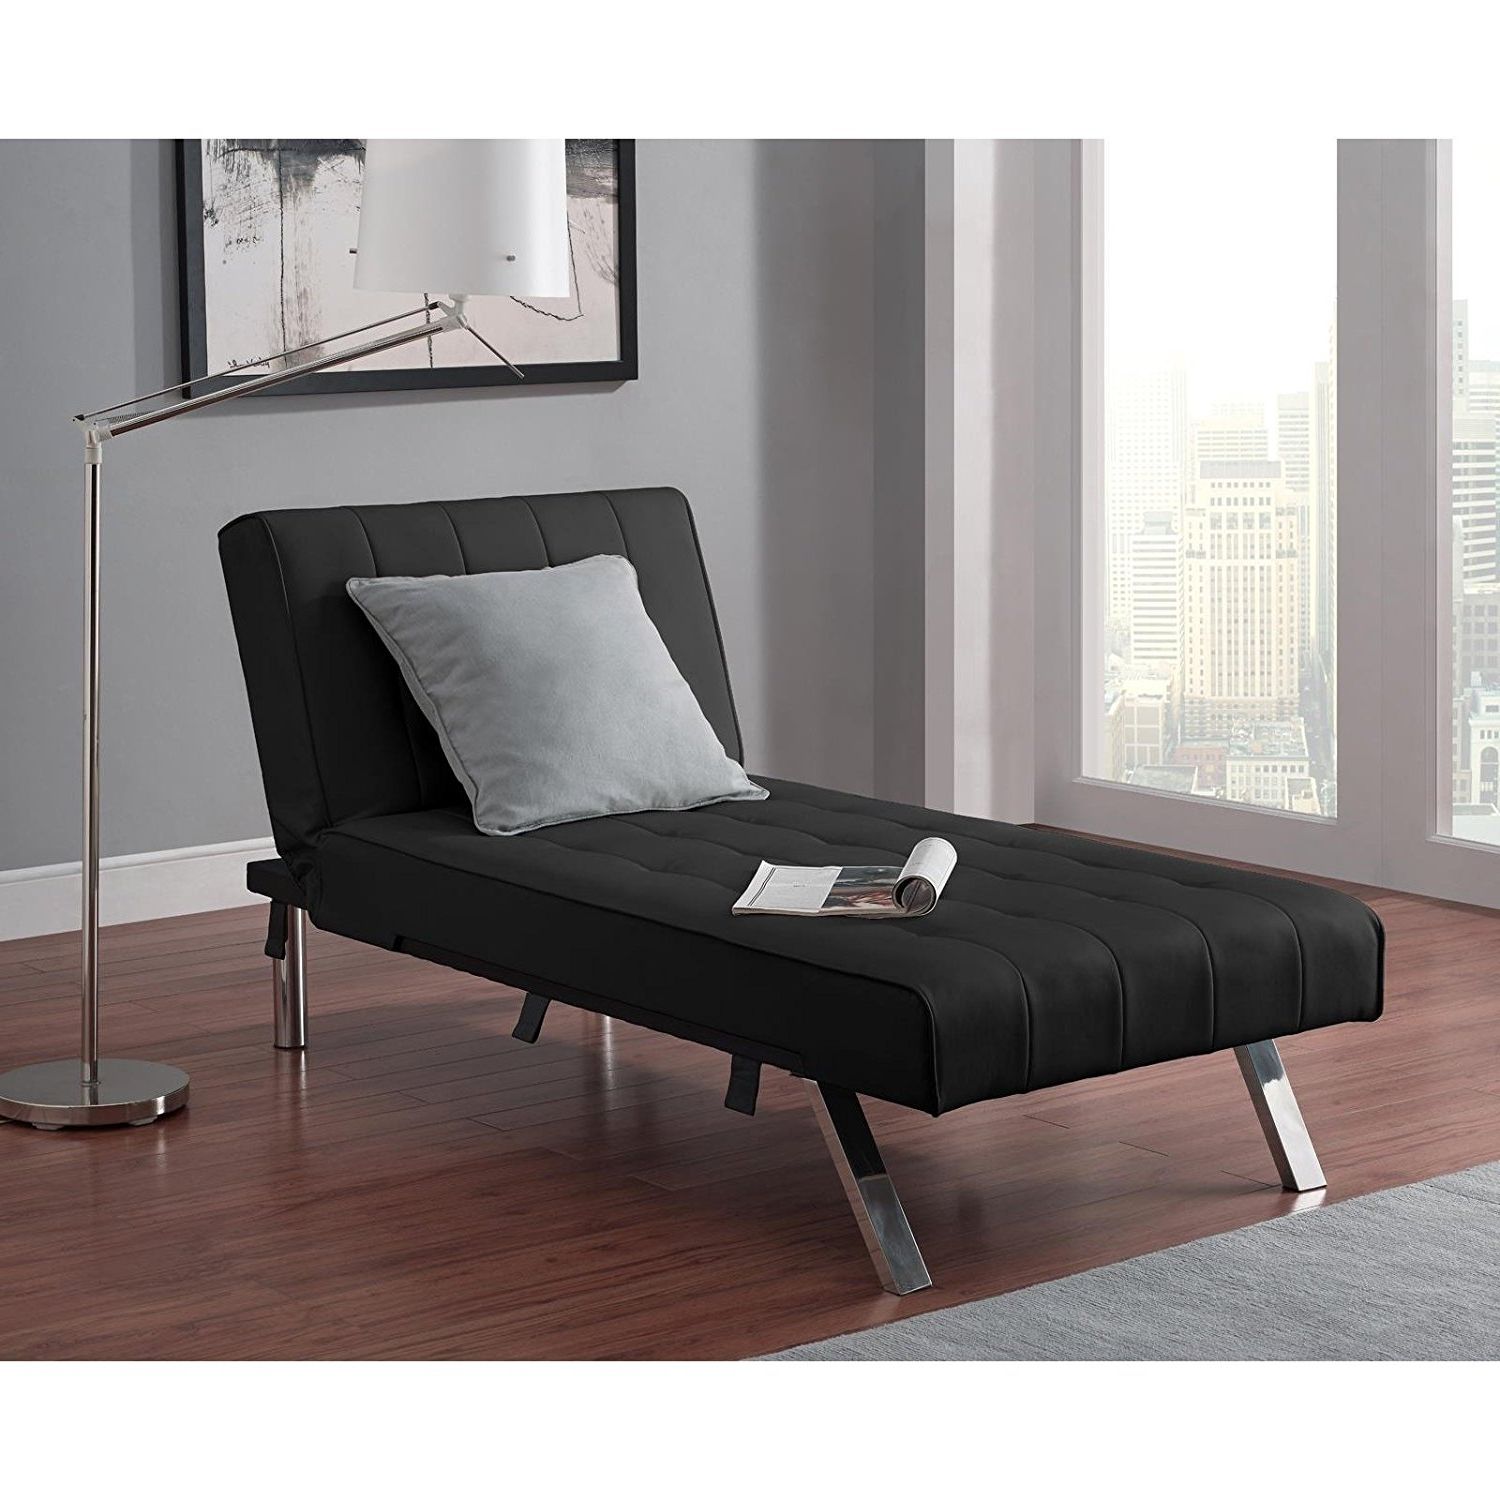 Widely Used Amazon: Emily Futon With Chaise Lounger Super Bonus Set Black For Emily Chaises (View 1 of 15)